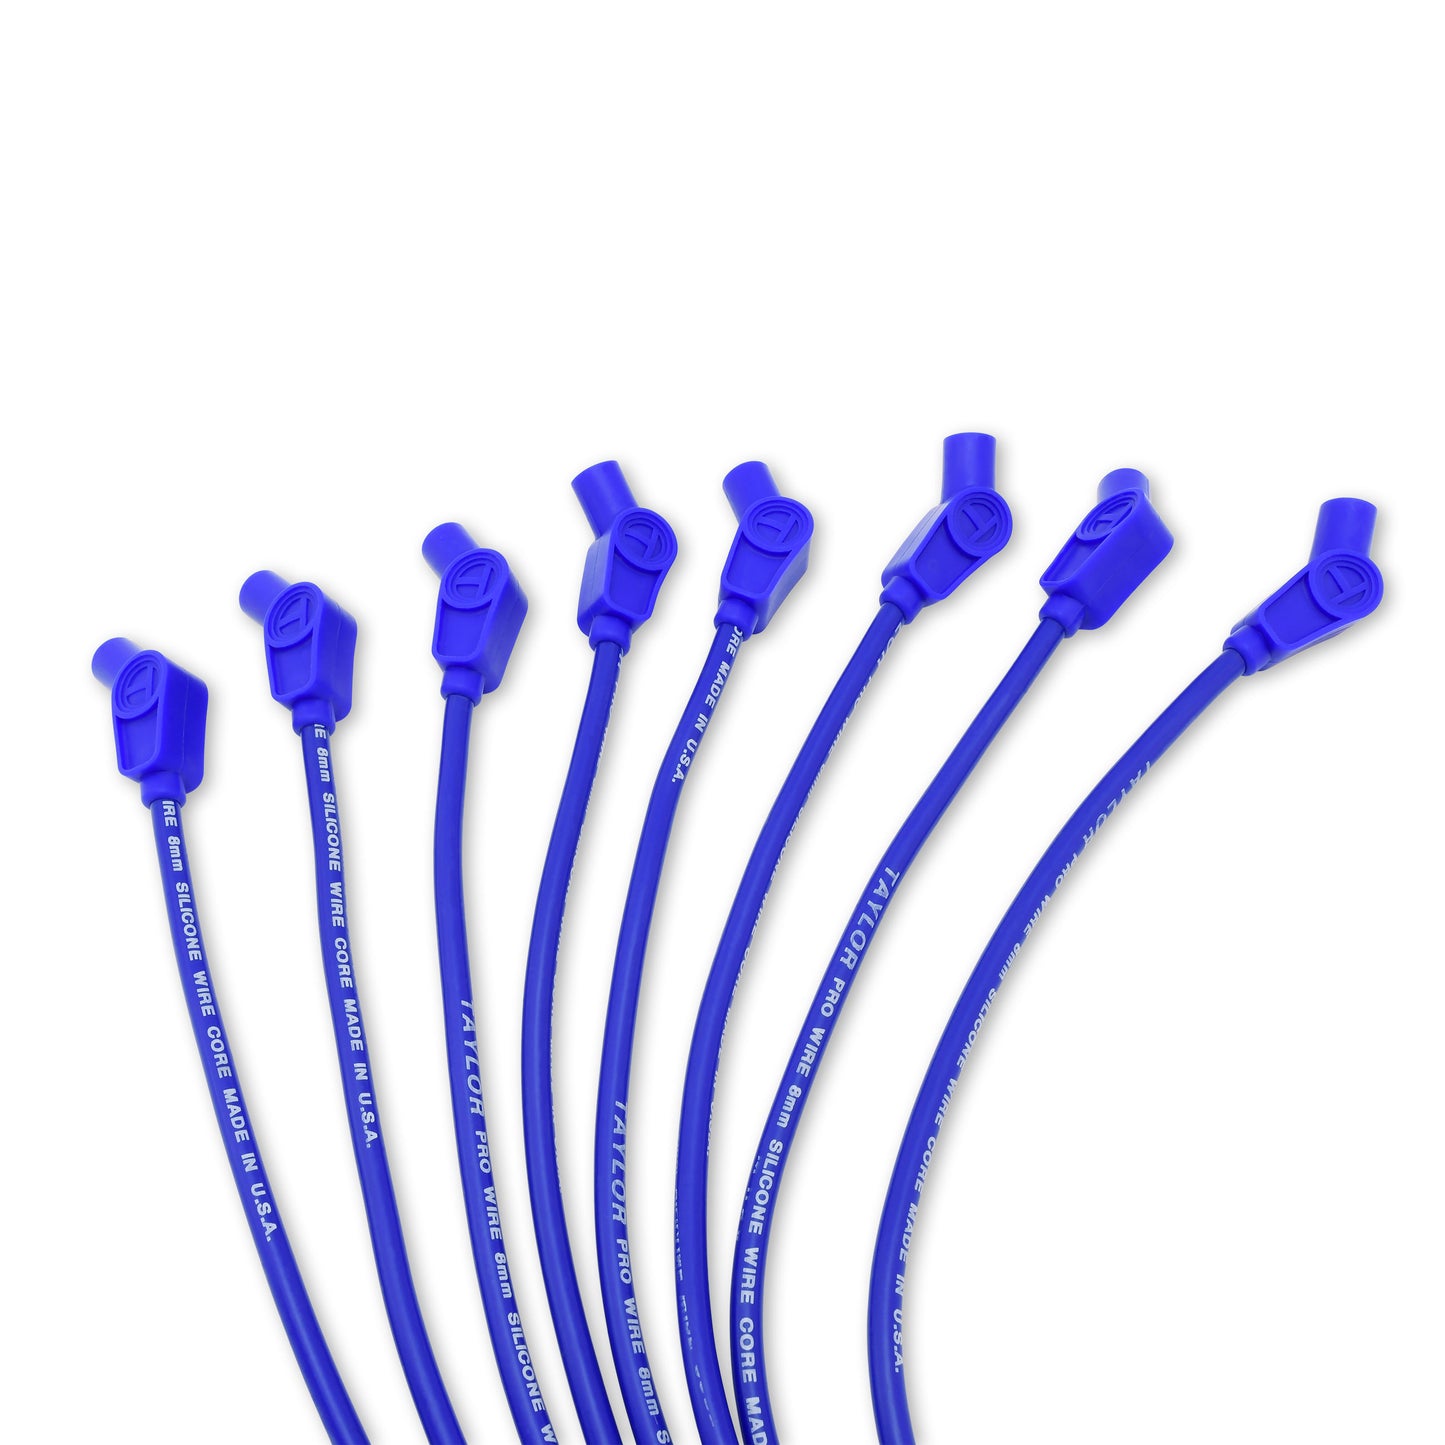 Taylor Cable 70652 8mm Pro TCW Ignition Wires univ 8 cyl 135 blue